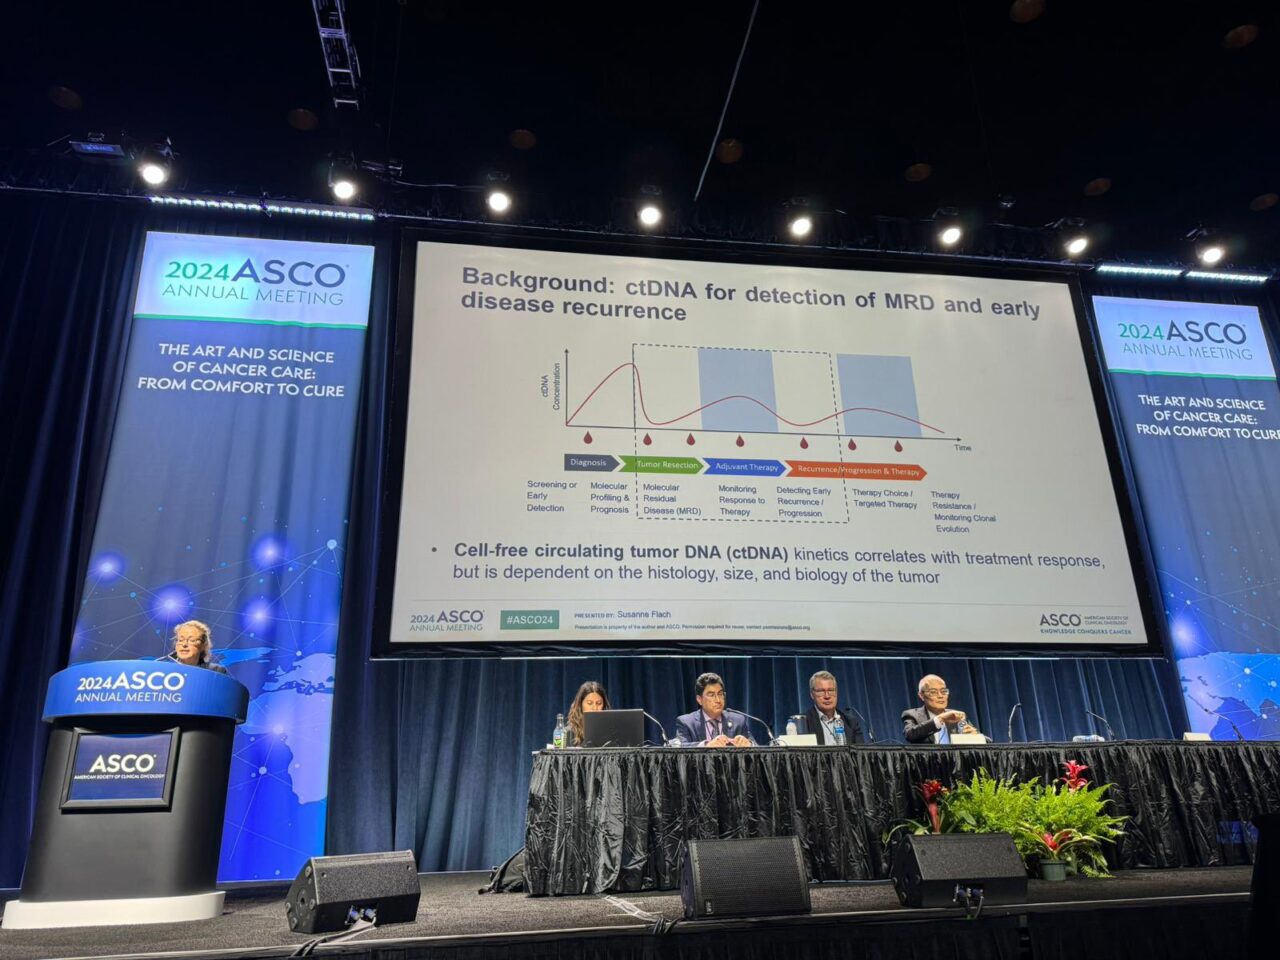 Susanna Flach: Incredible experience to present our work at this year’s ASCO meeting